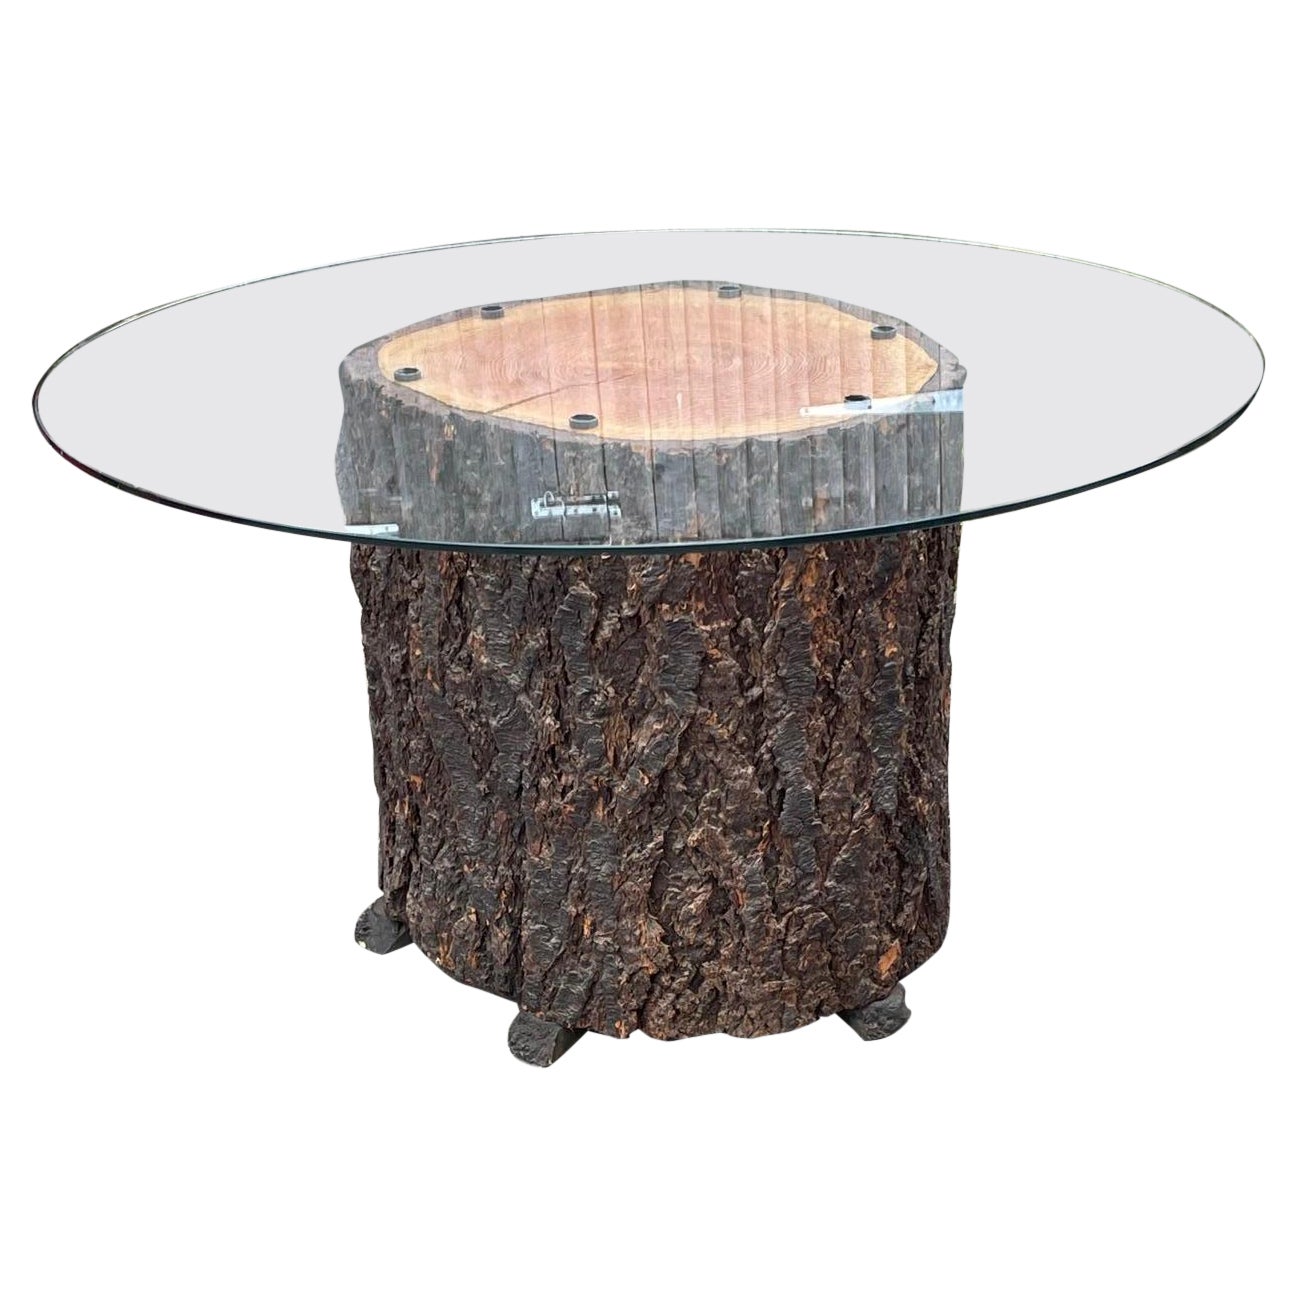 Bespoke Center Table Made with Douglas Fern, Bog Wood and a Glass Circular Top For Sale